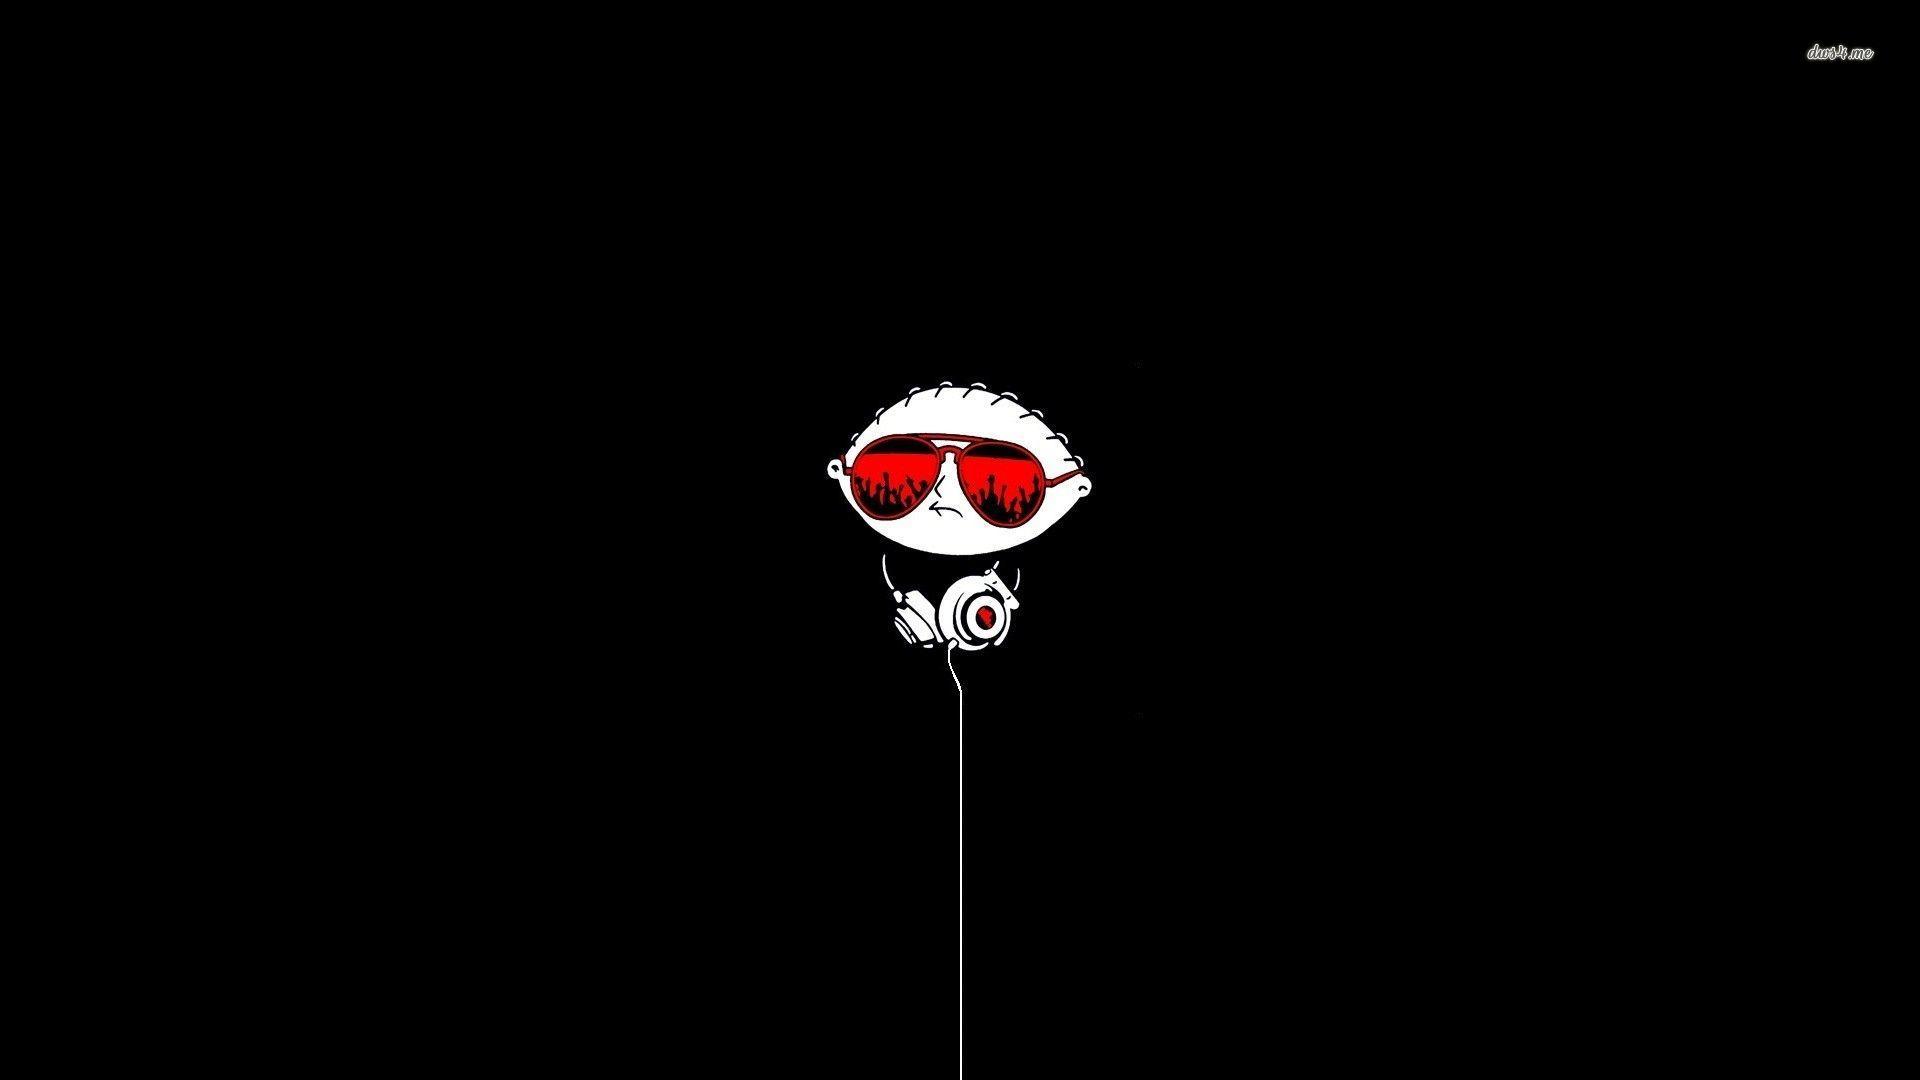 DJ Stewie Griffin from Family Guy wallpaper